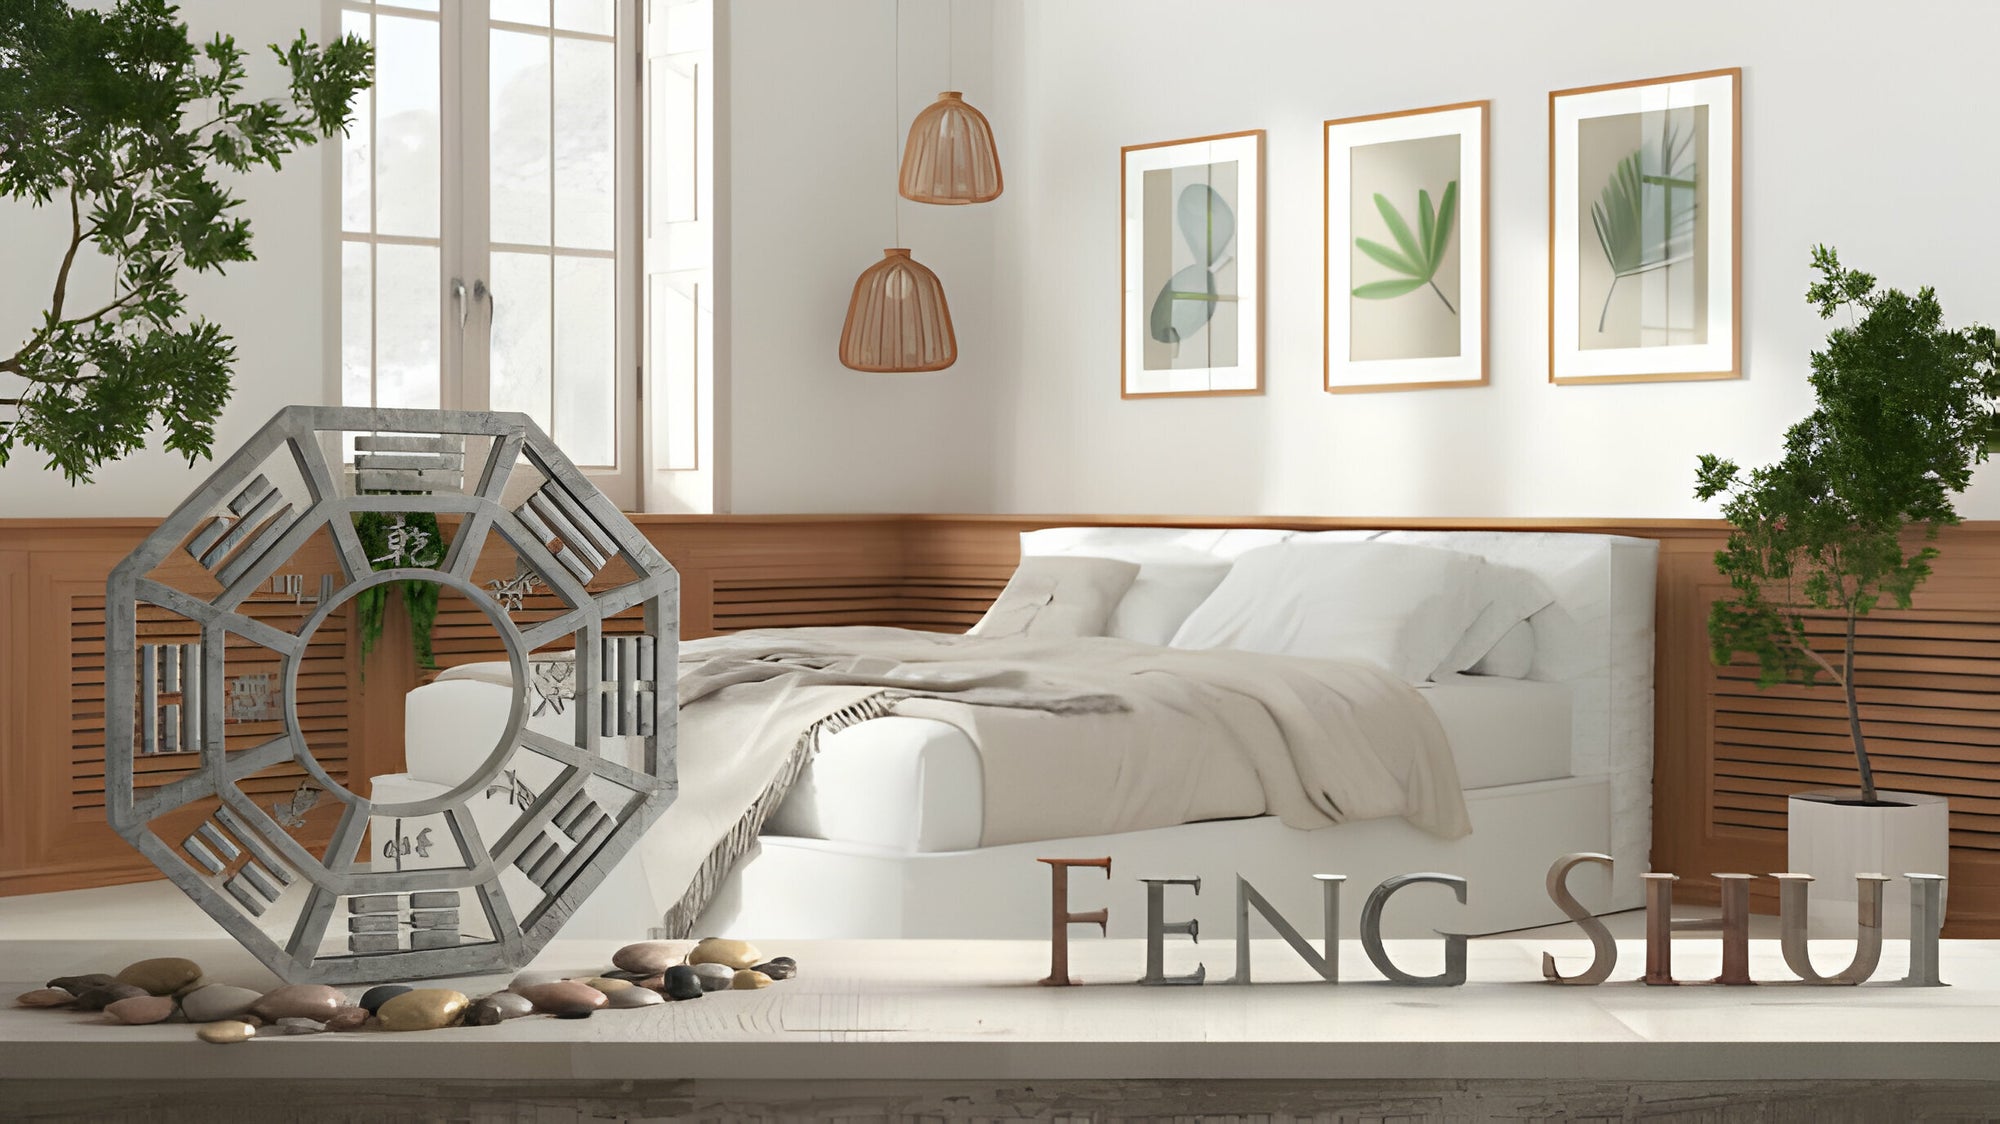 Feng Shui in Interior Design: Creating Harmony Within Your Home